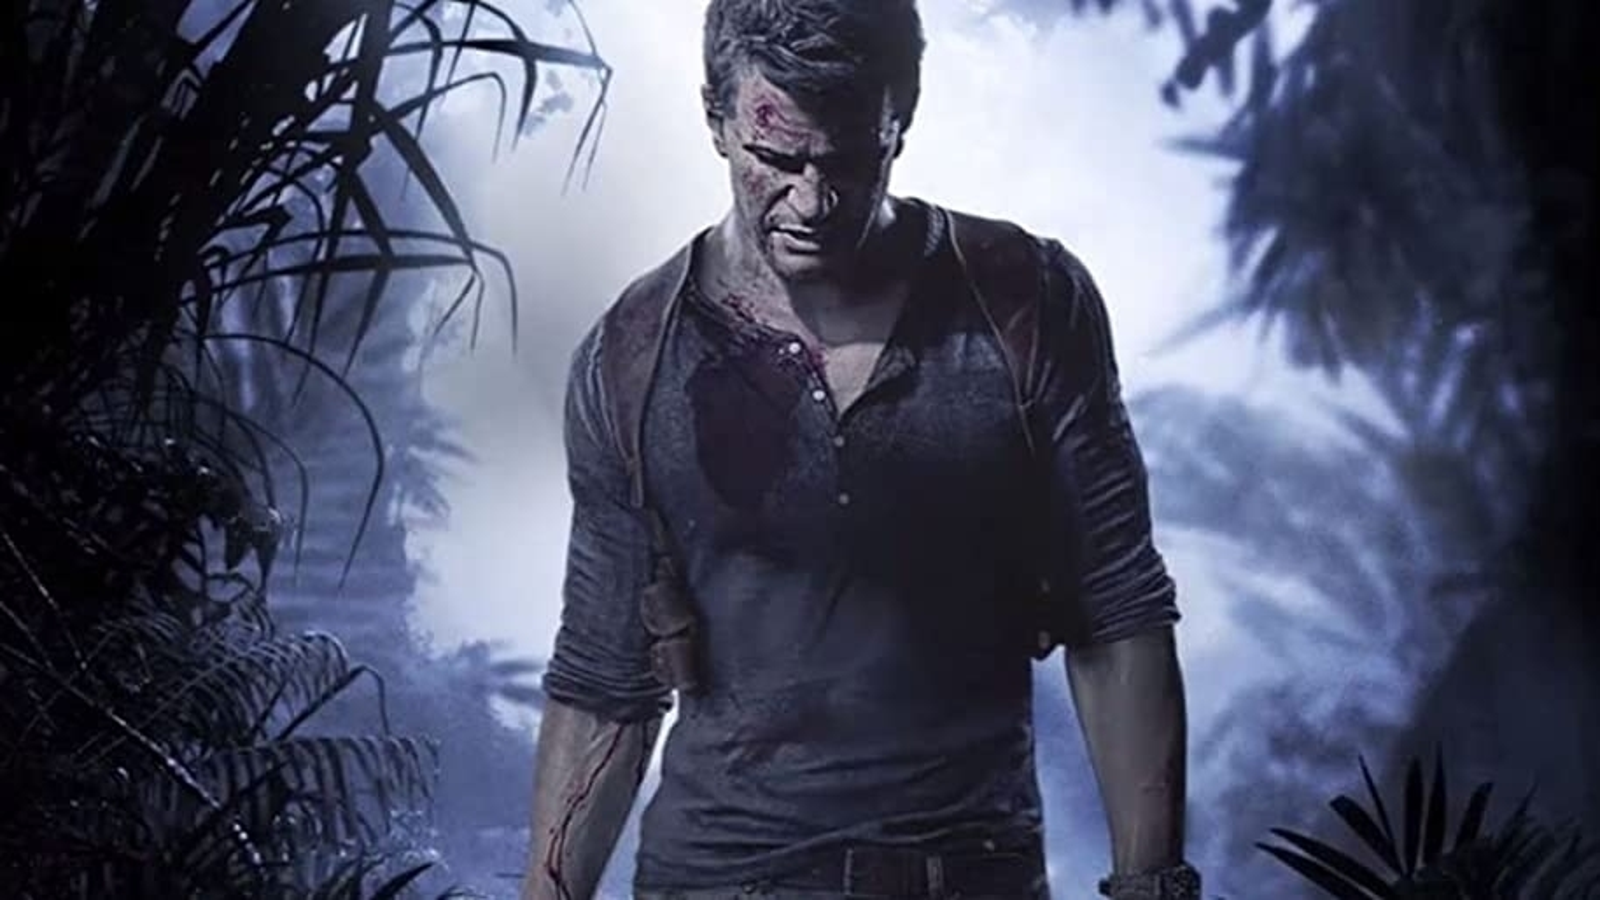 Uncharted 4 PC Port Confirmed in Official Sony Documents